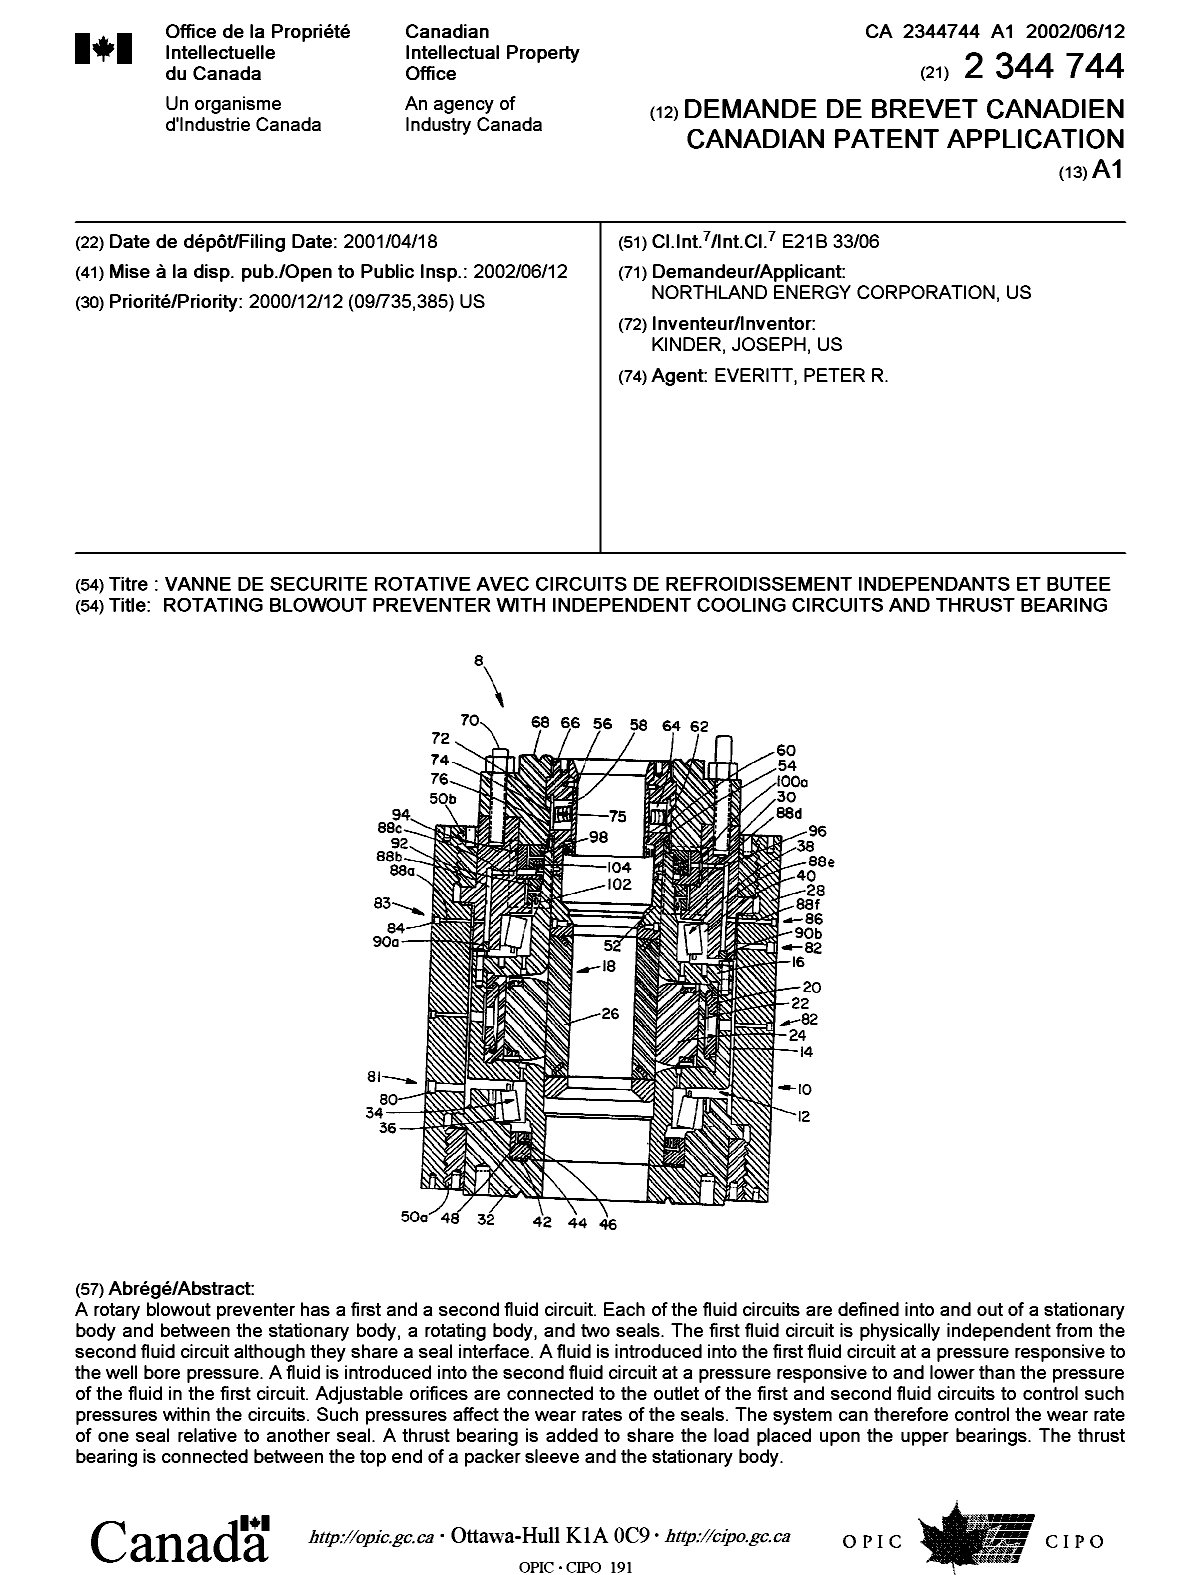 Canadian Patent Document 2344744. Cover Page 20020607. Image 1 of 1